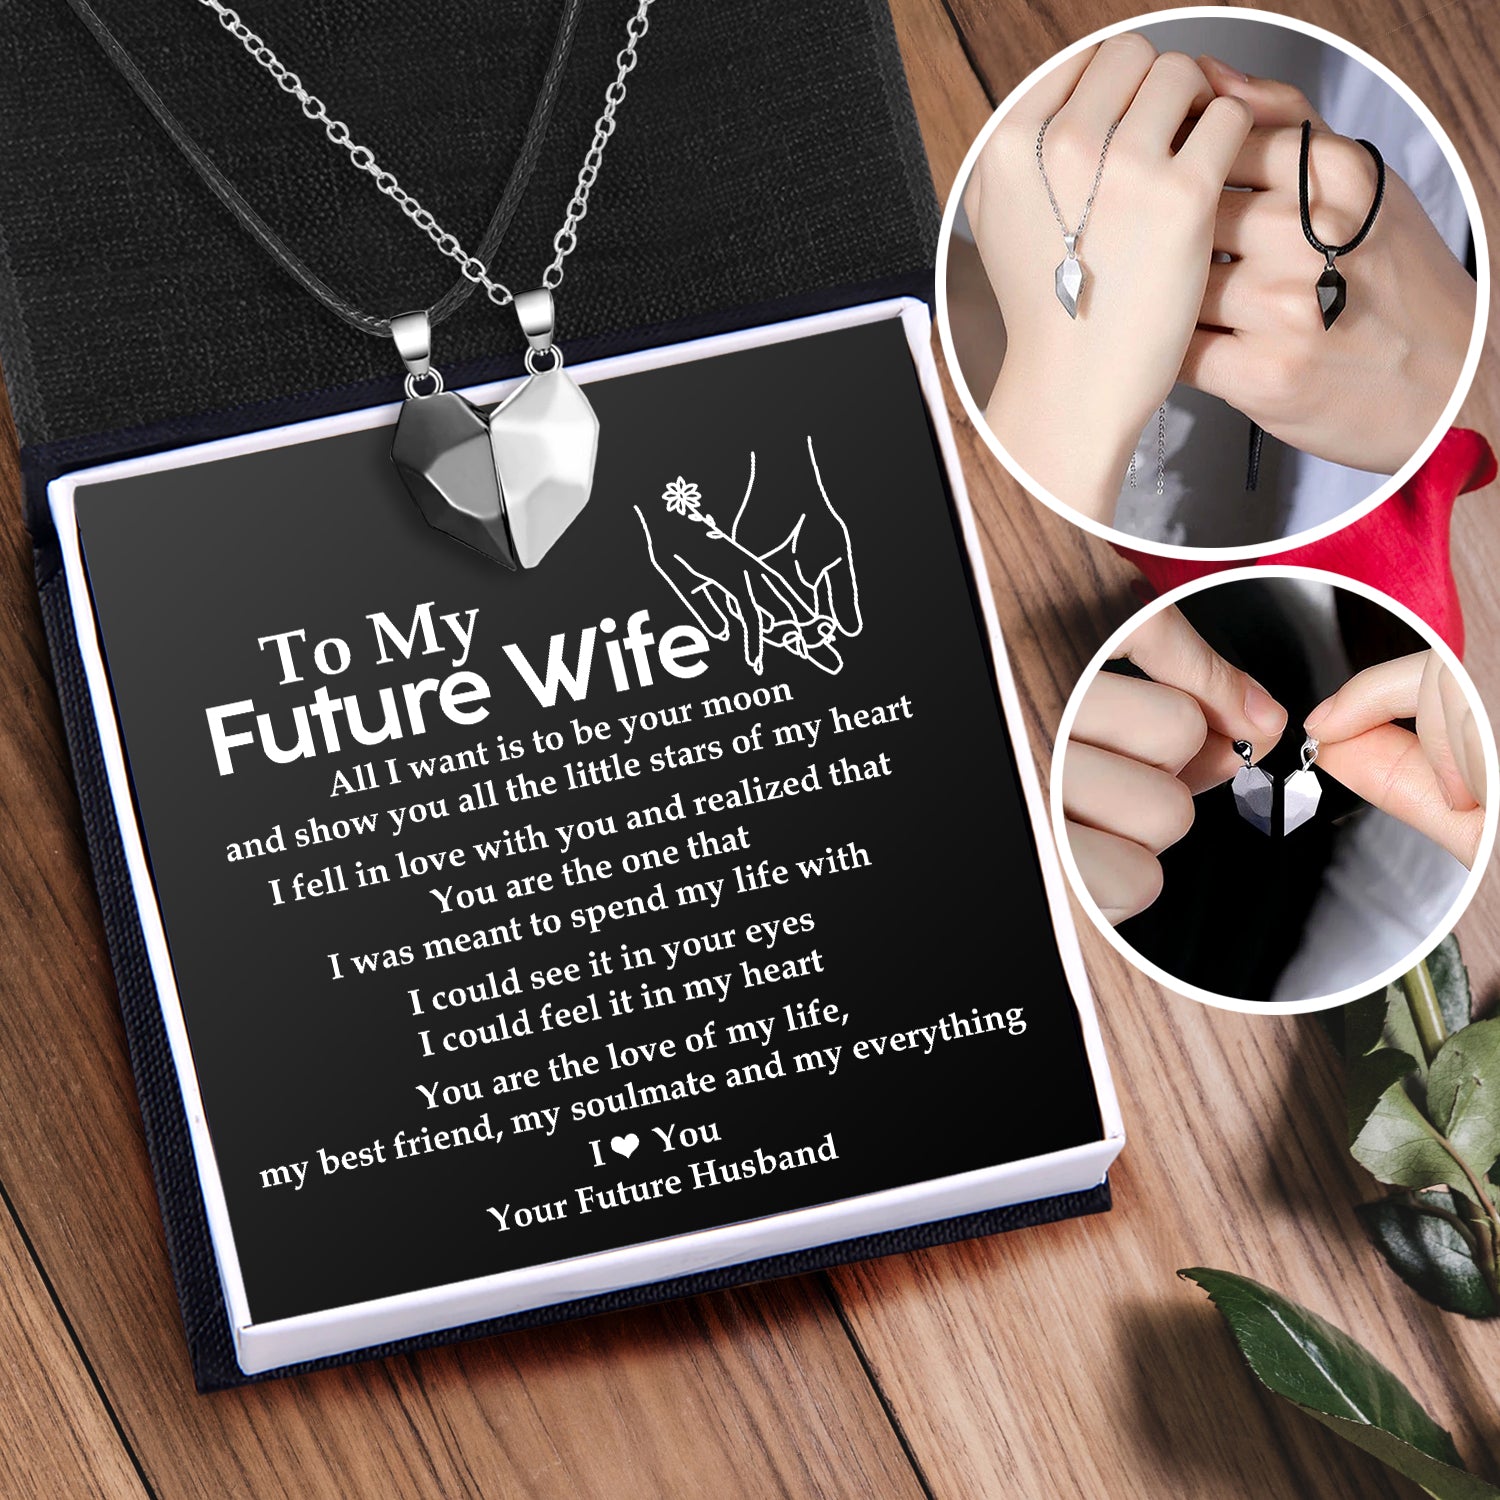 Gifts for future wife Page 4 - Love My Soulmate